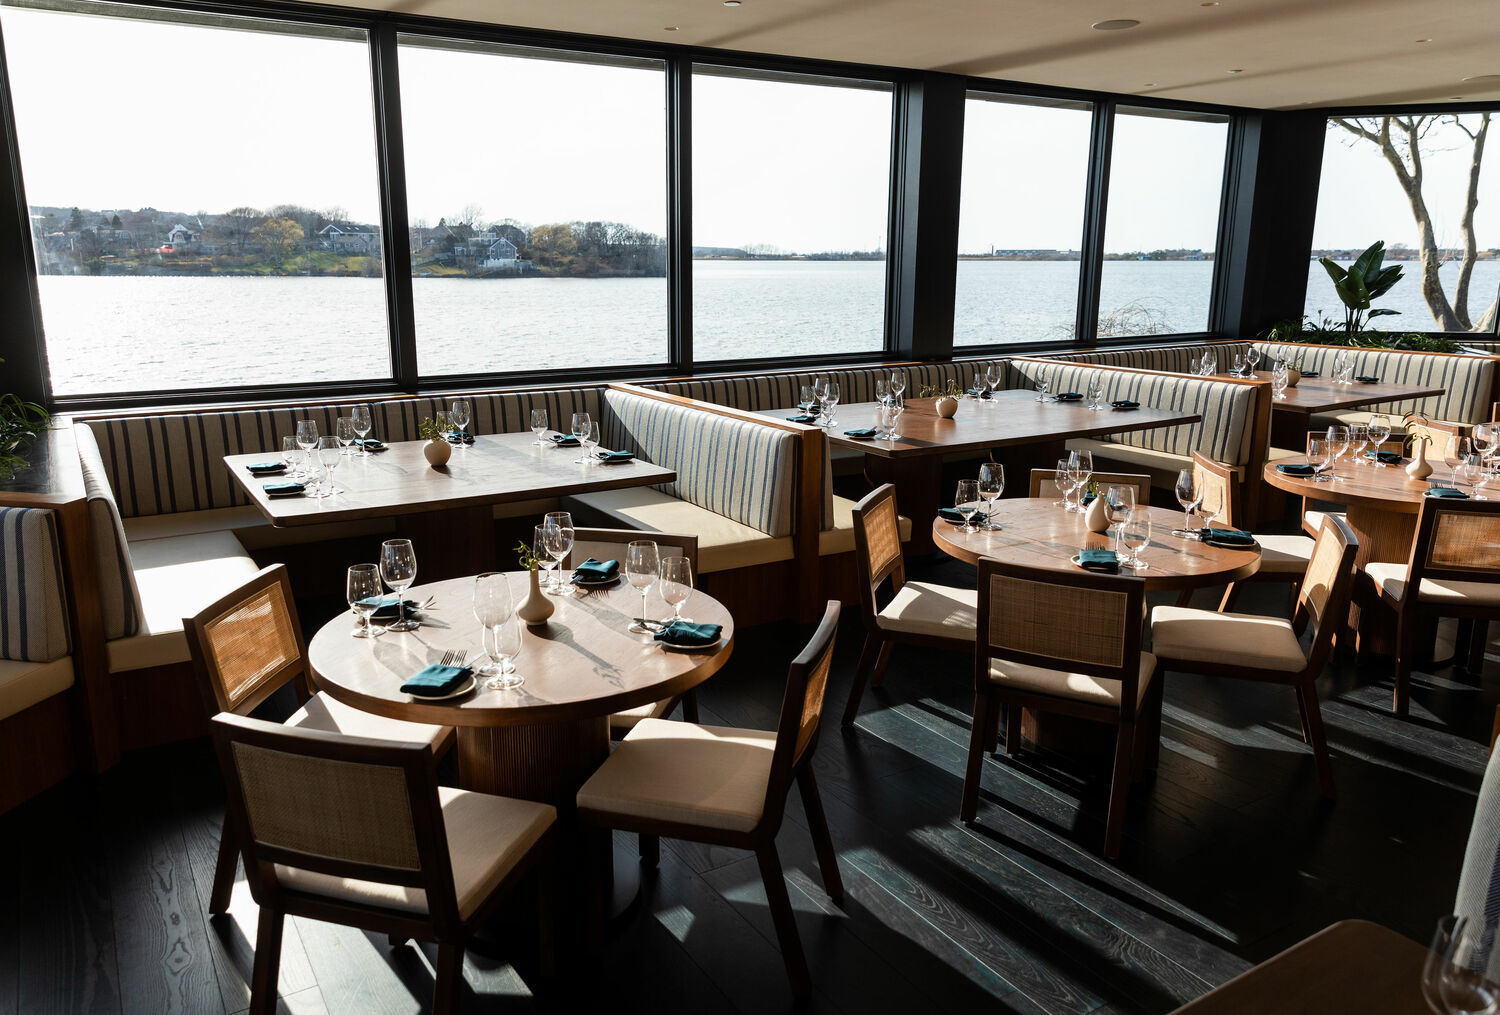 New this season is Mavericks, a steakhouse with water views in Montauk. MICHELLE MCSWAIN